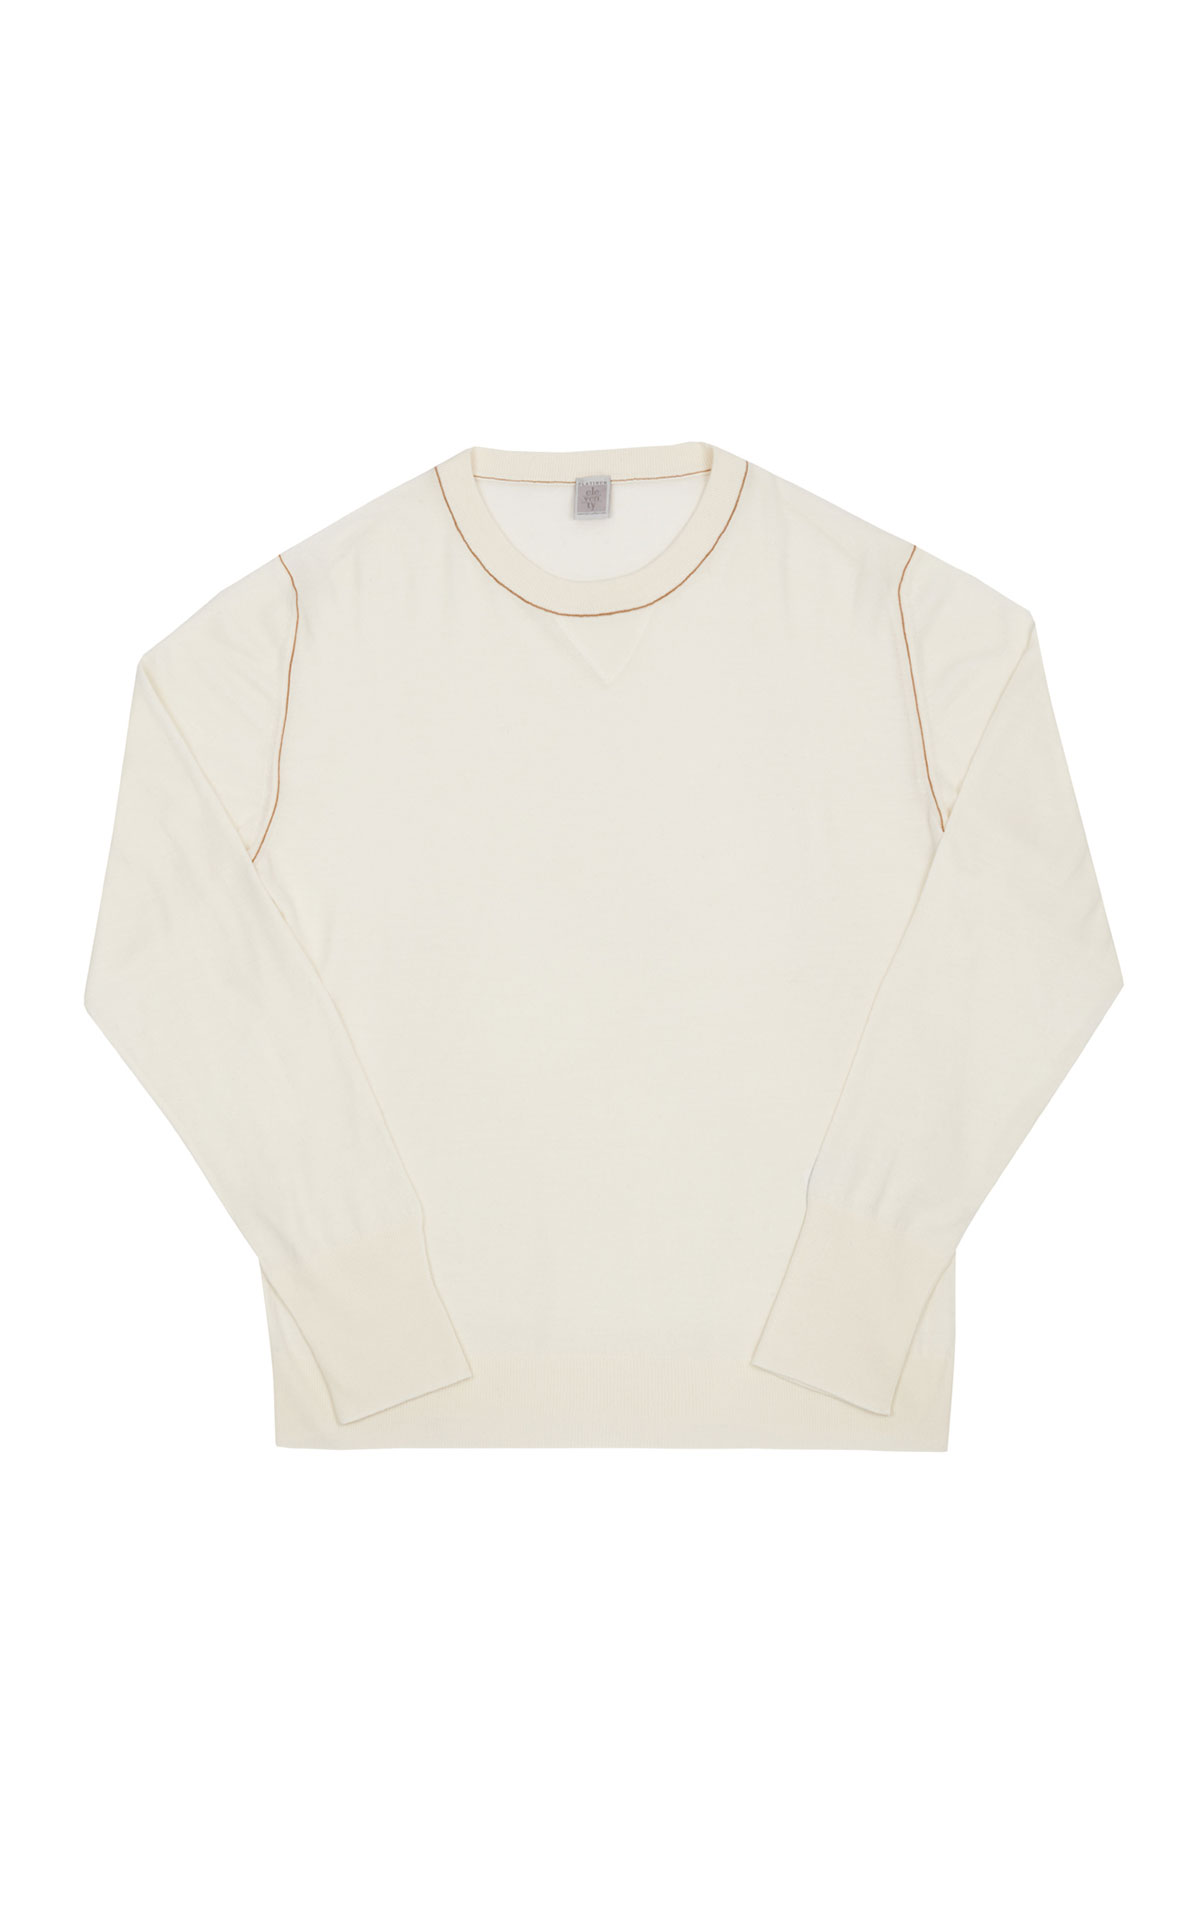 Eleventy Cashmere sweater with contrast stitching from Bicester Village